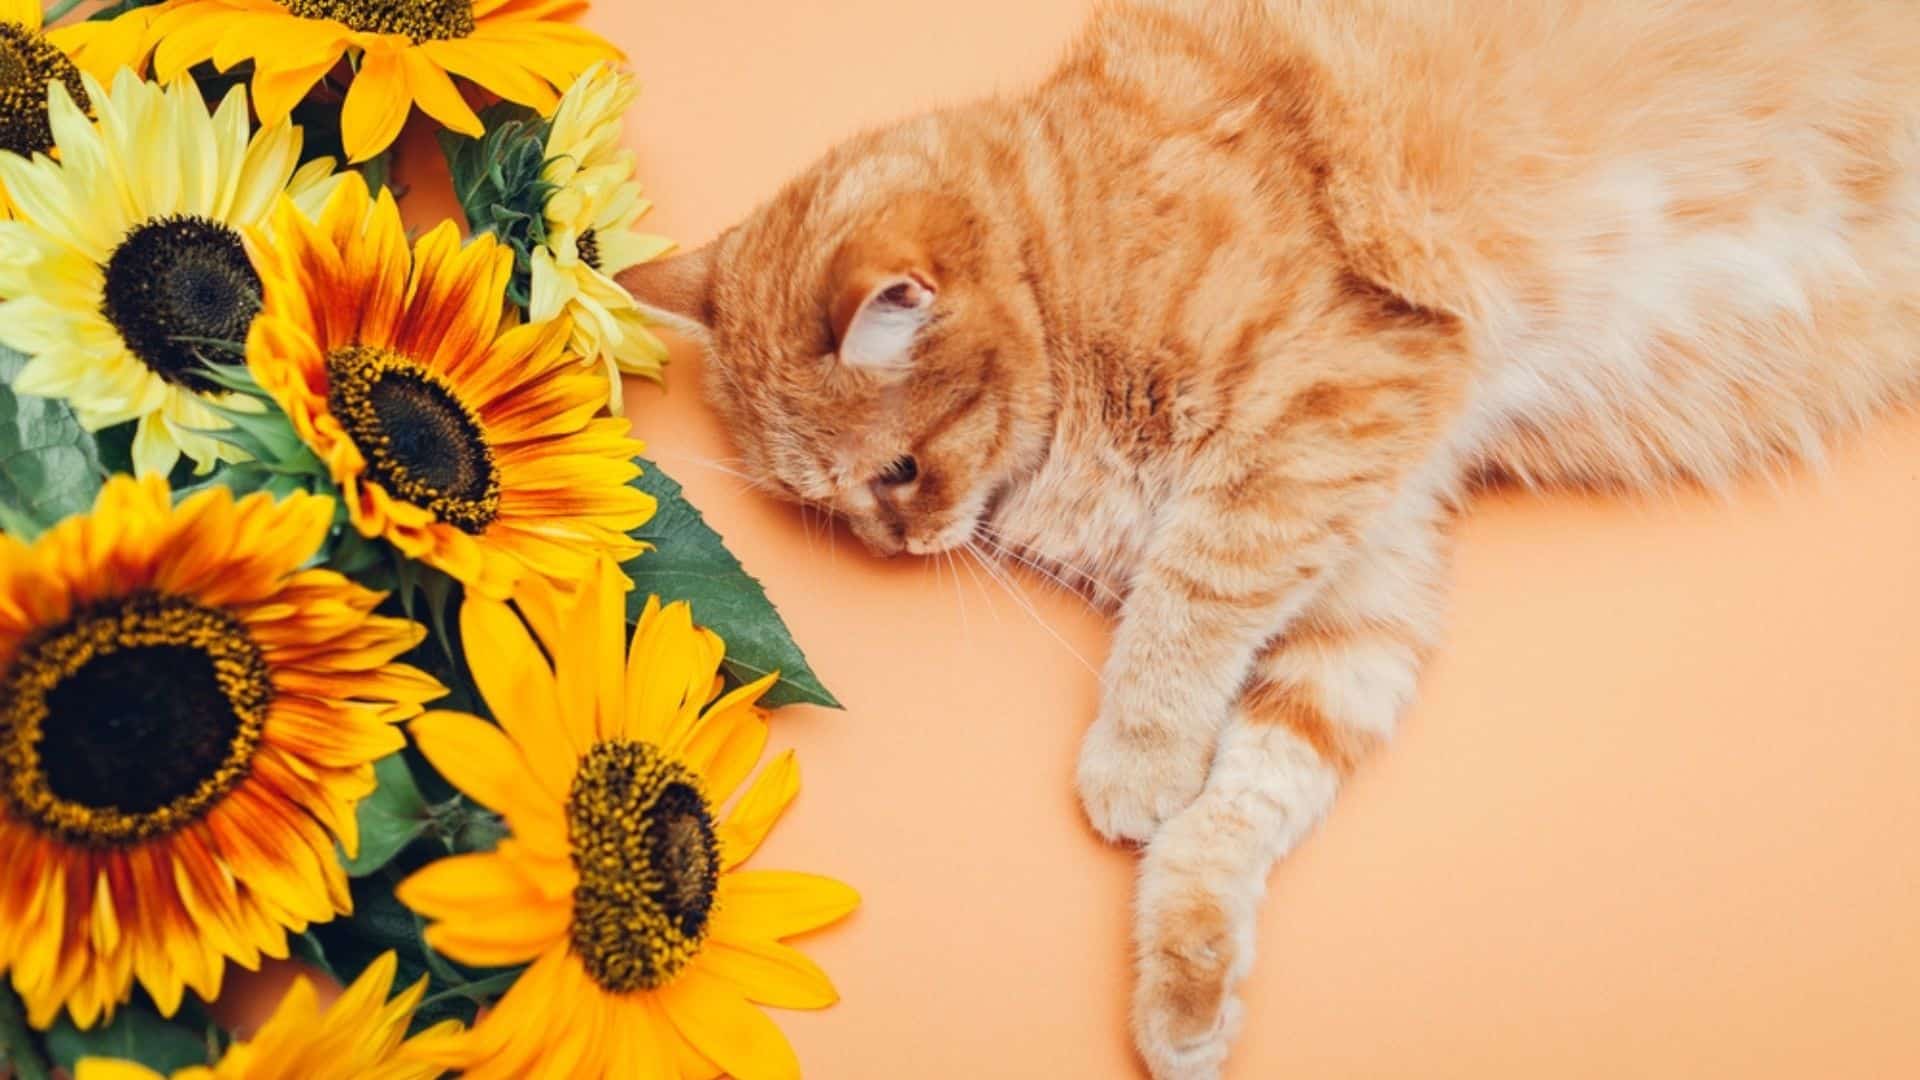 Ginger cat lying next to bunch of colorful sunflowers